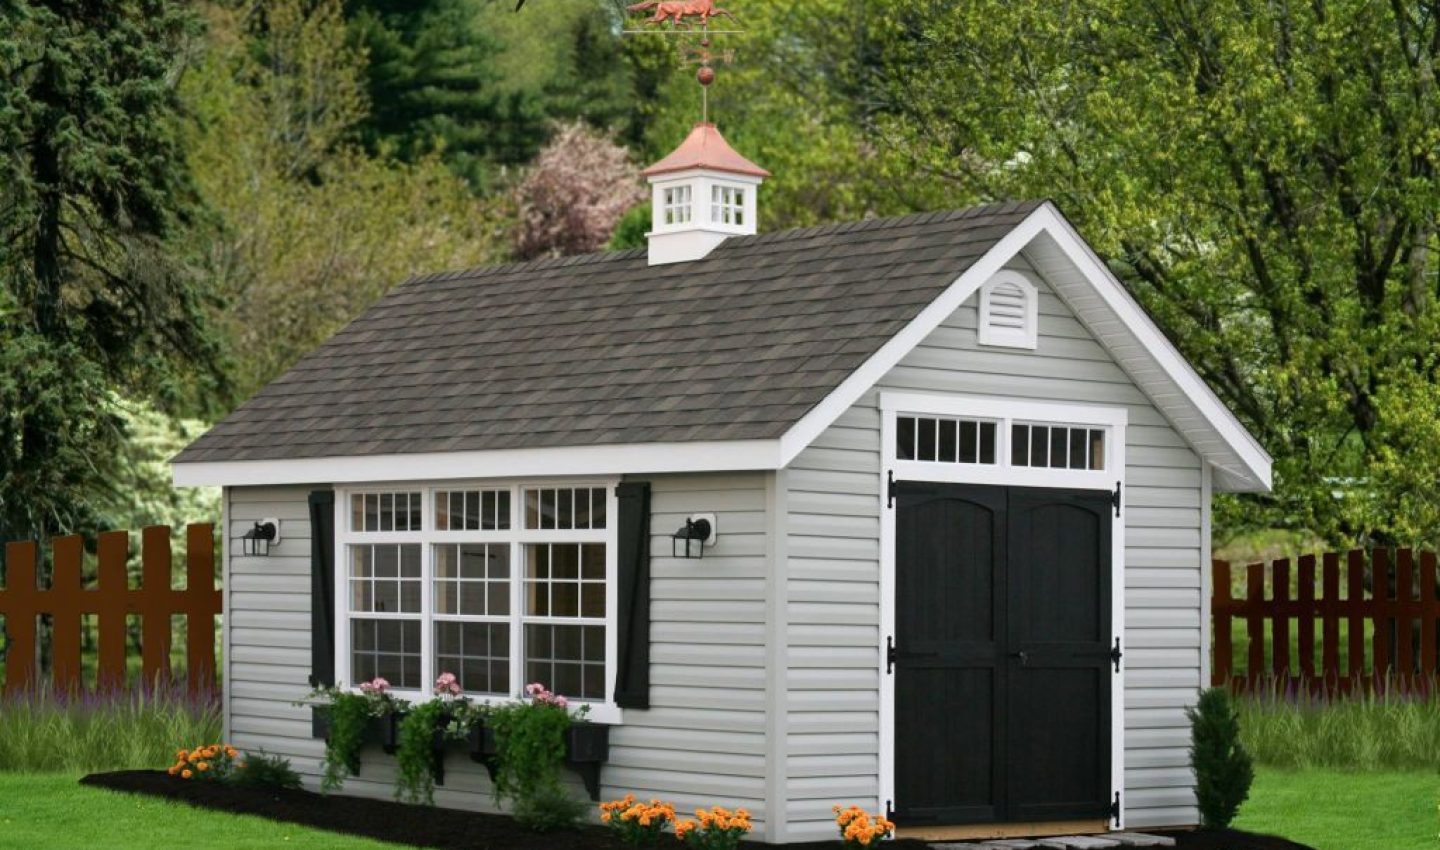 Top Rated Outdoor Sheds Made in the USA